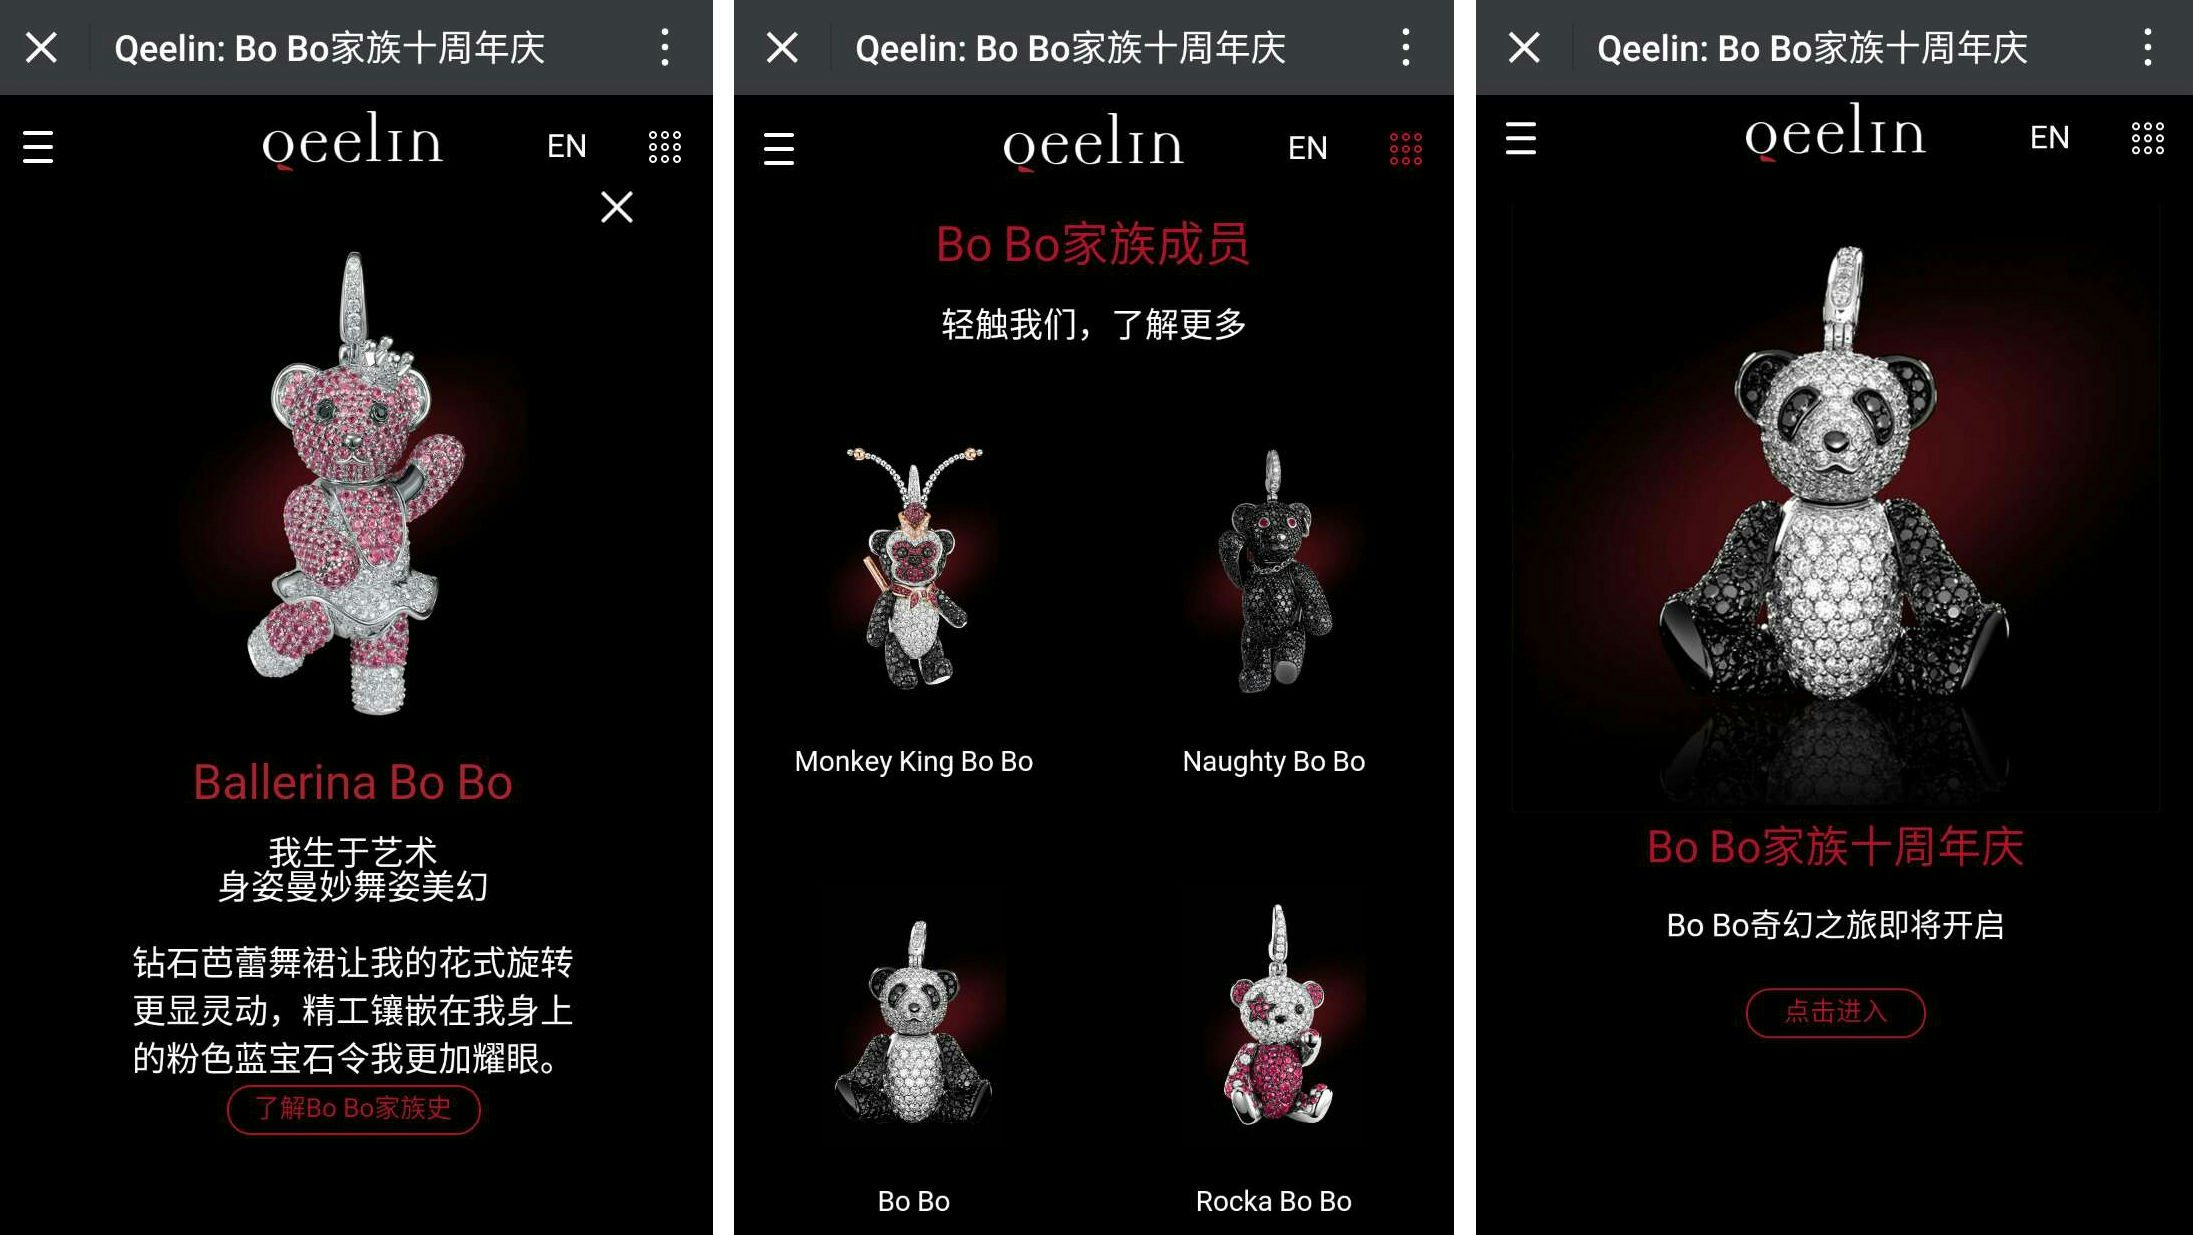 Qeelin utilizes user generated content on its WeChat page as a strategy to engage readership.